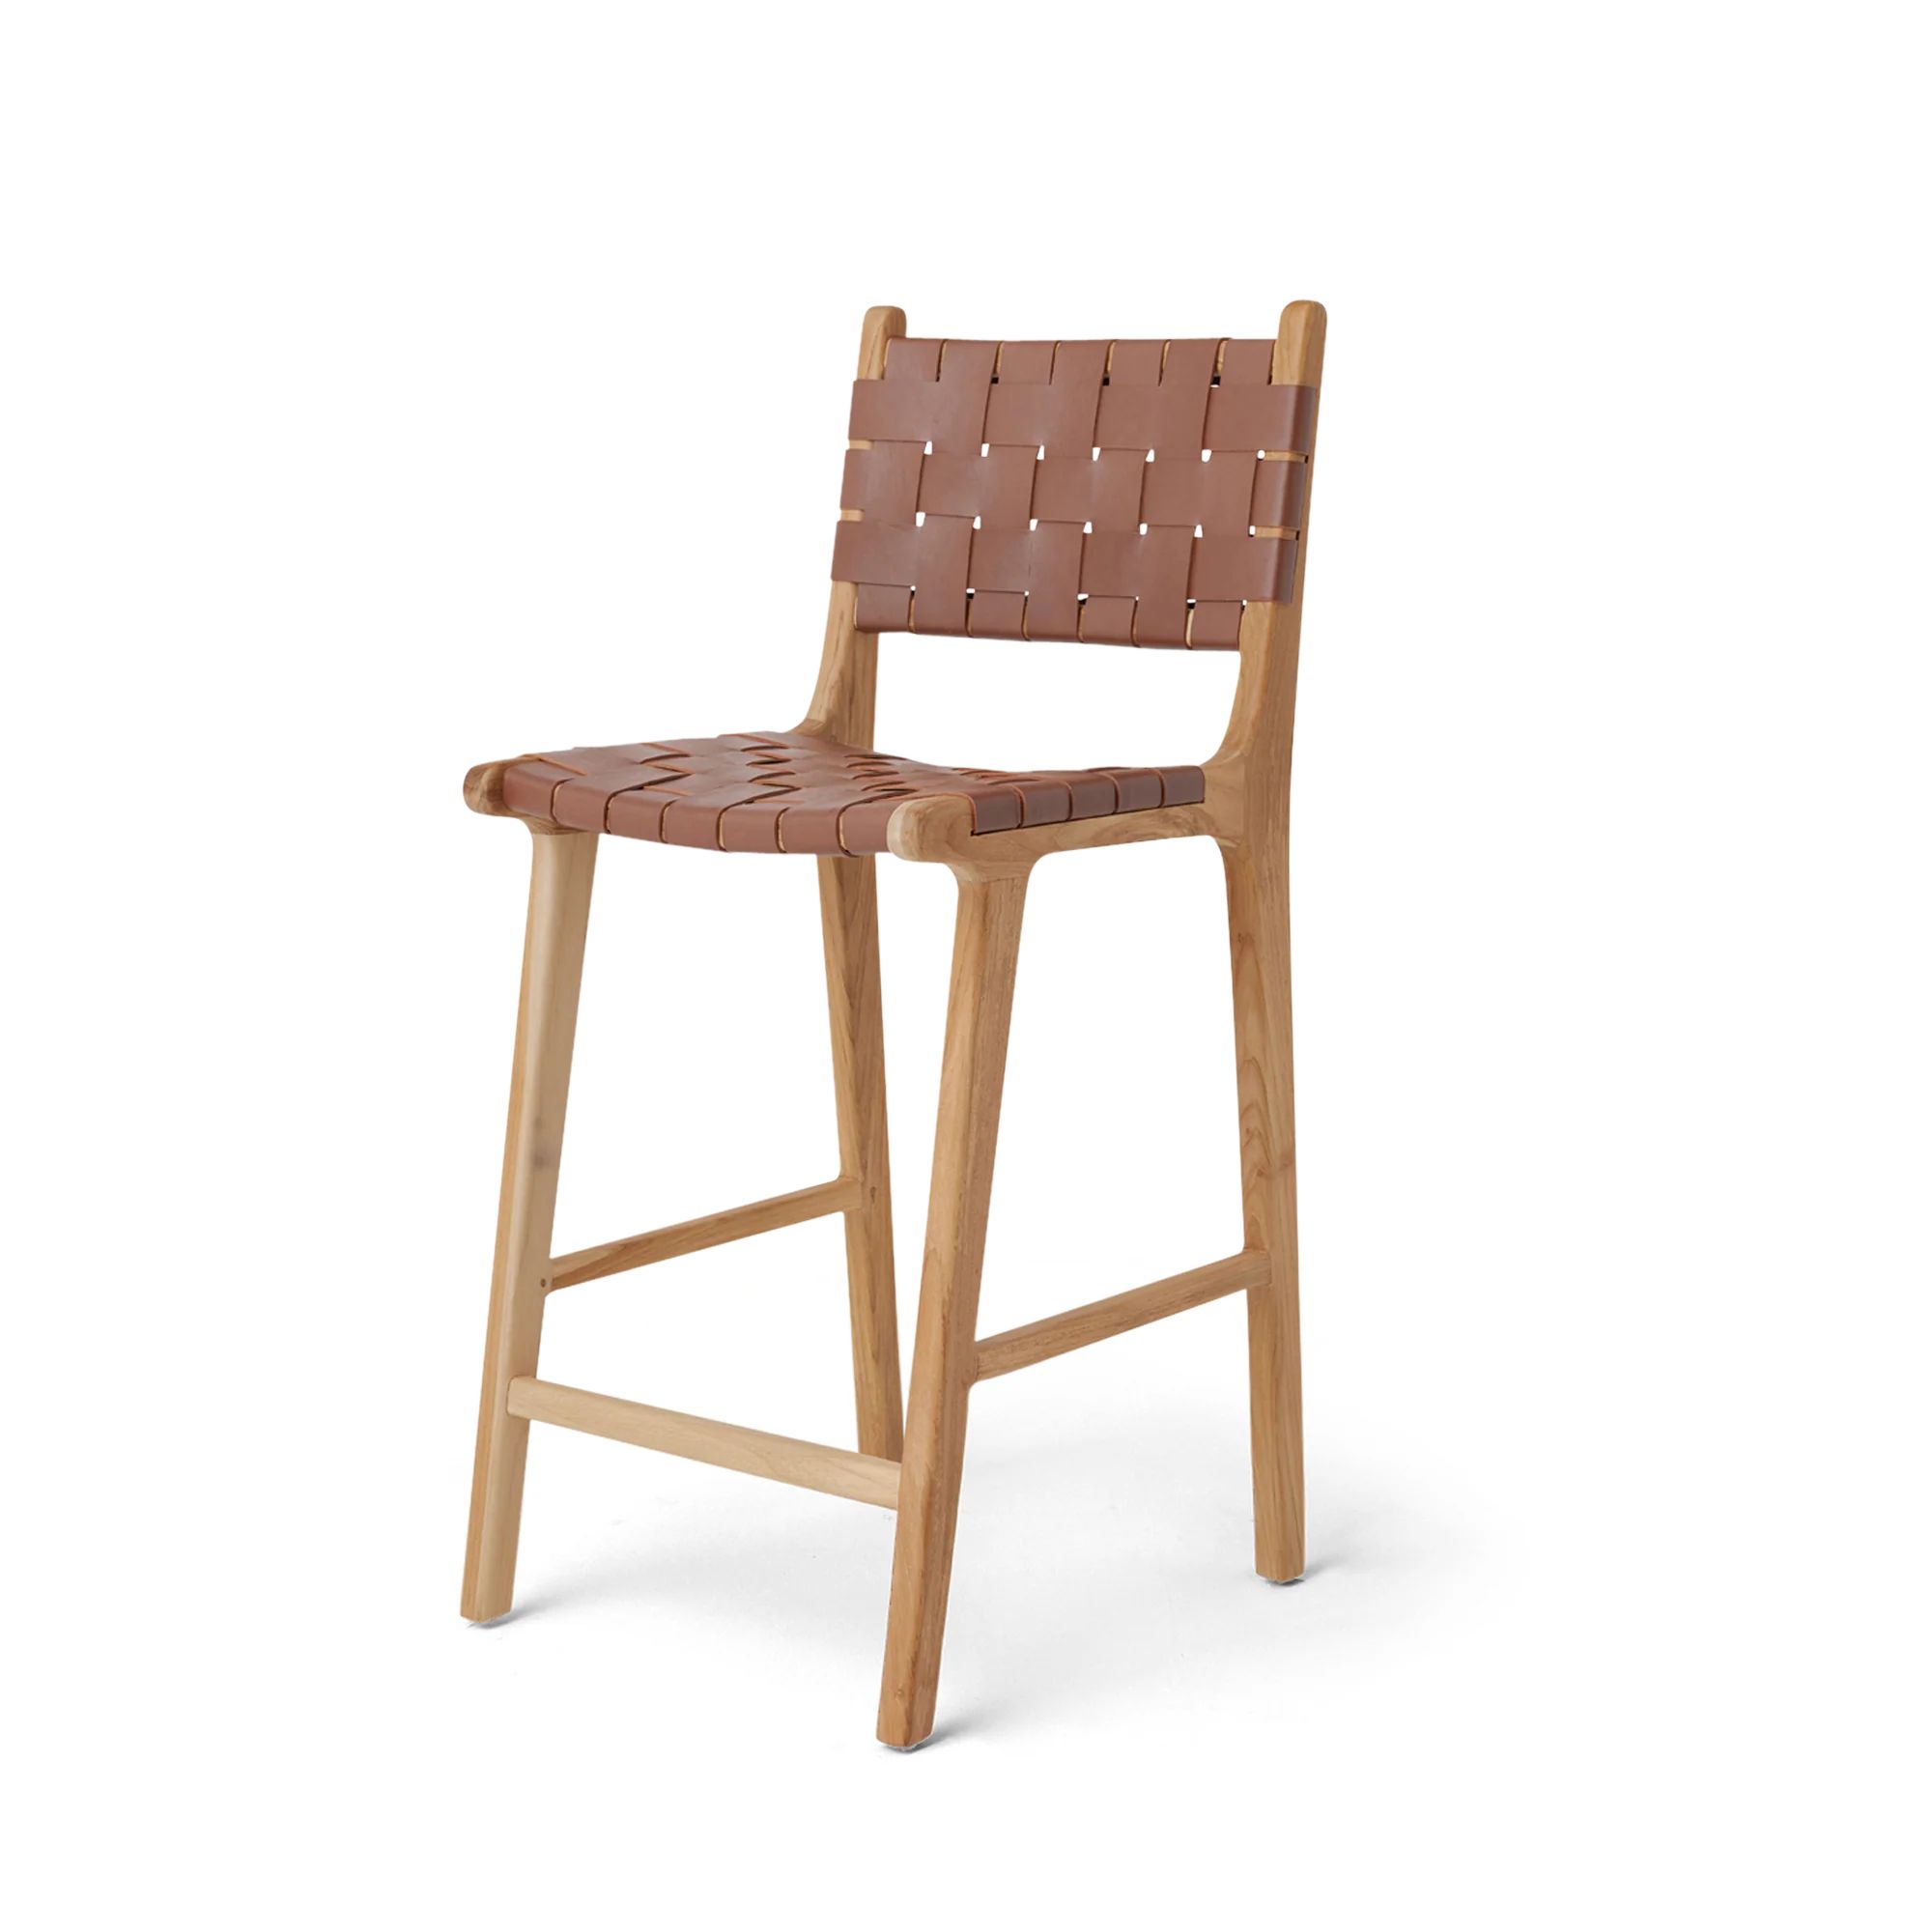 stool #2 in whiskey | Hati Home